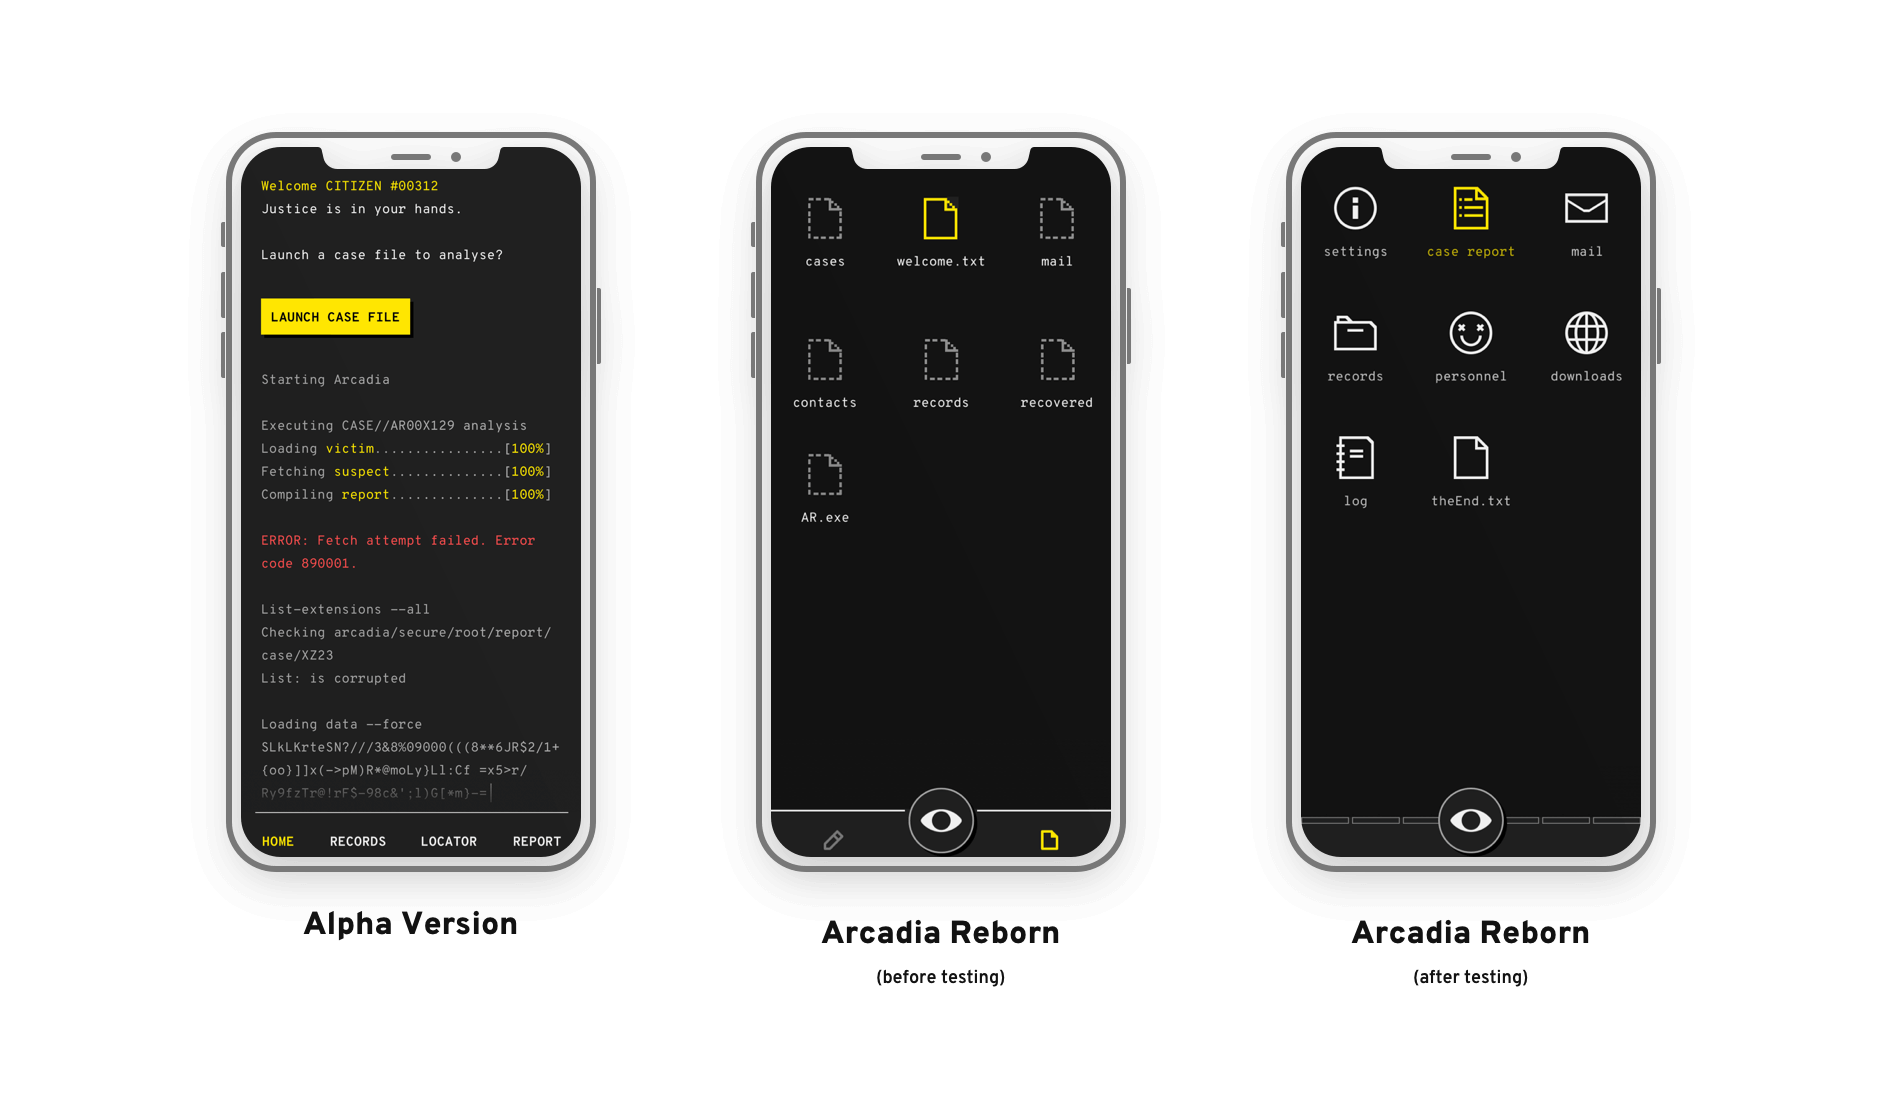 Three iterations of Arcadia, evolving the UI from text only to a simplified, desktop-style metaphor based on user testing.